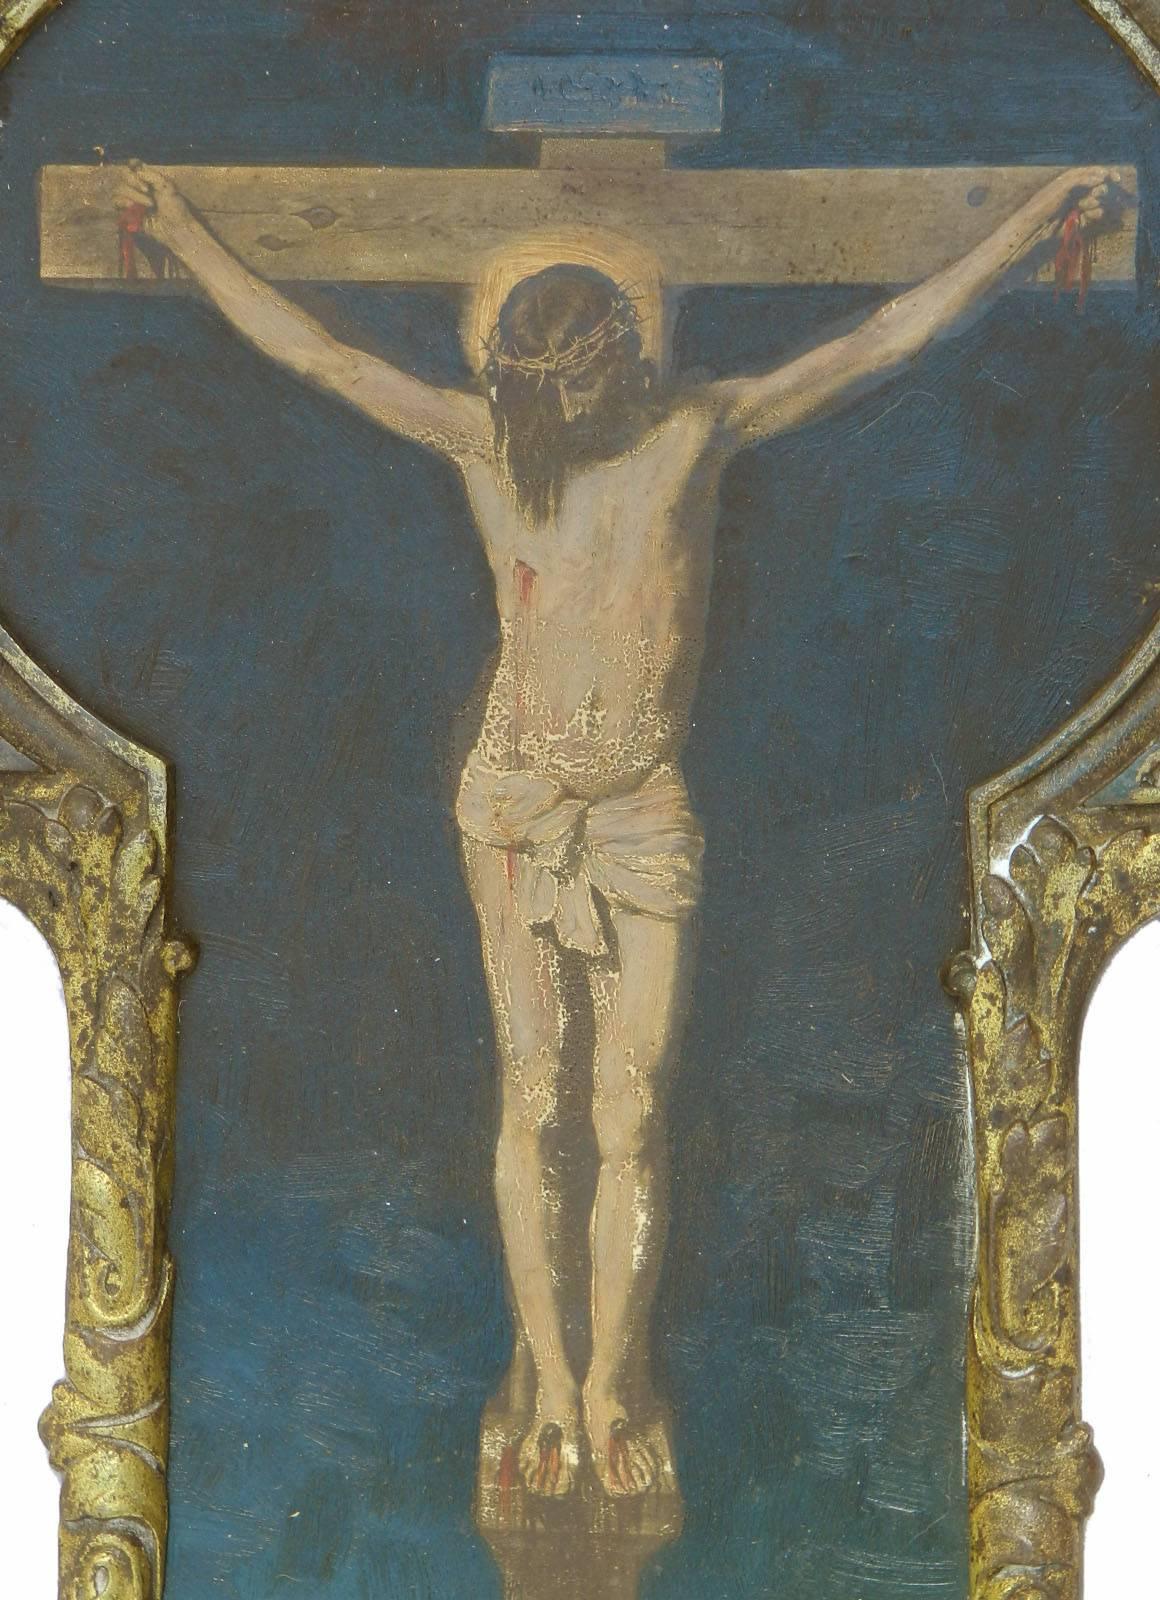 French painting of the Crucifixion in its original frame, circa 1890-1900
Oil on board
Framed in Paris
In unrestored condition with signs of age and minor distressing not at all distracting for such an interesting piece.
We offer a global parcel and